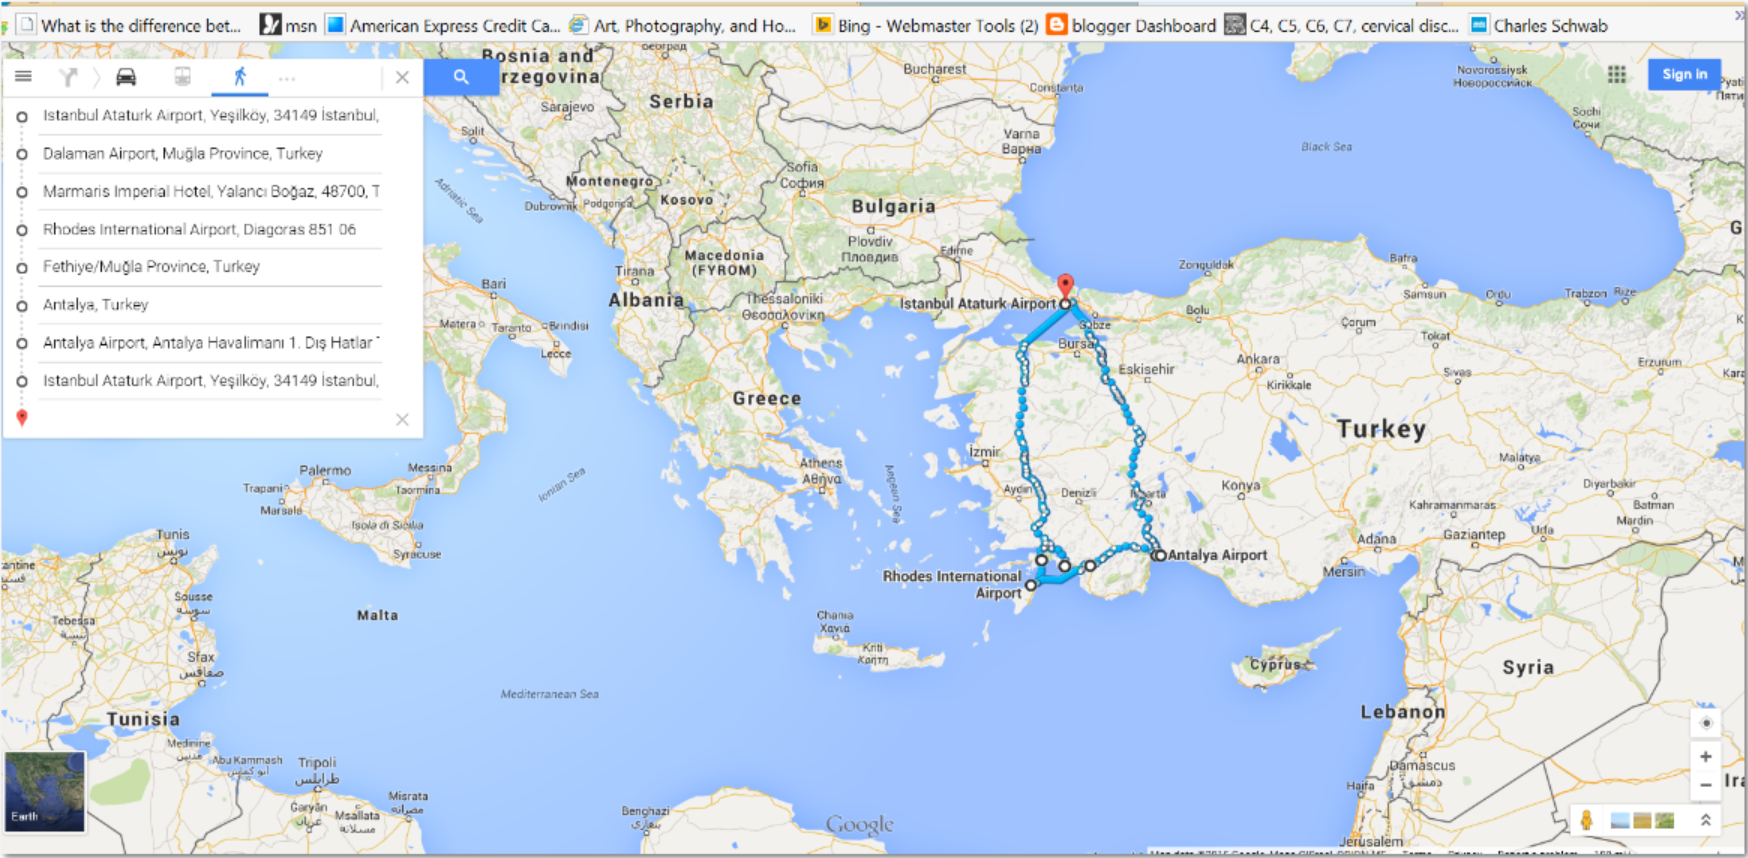 Southern Turkey Route, Istanbul to Rhodes, Greece to Fetheyi, Southern Turkey